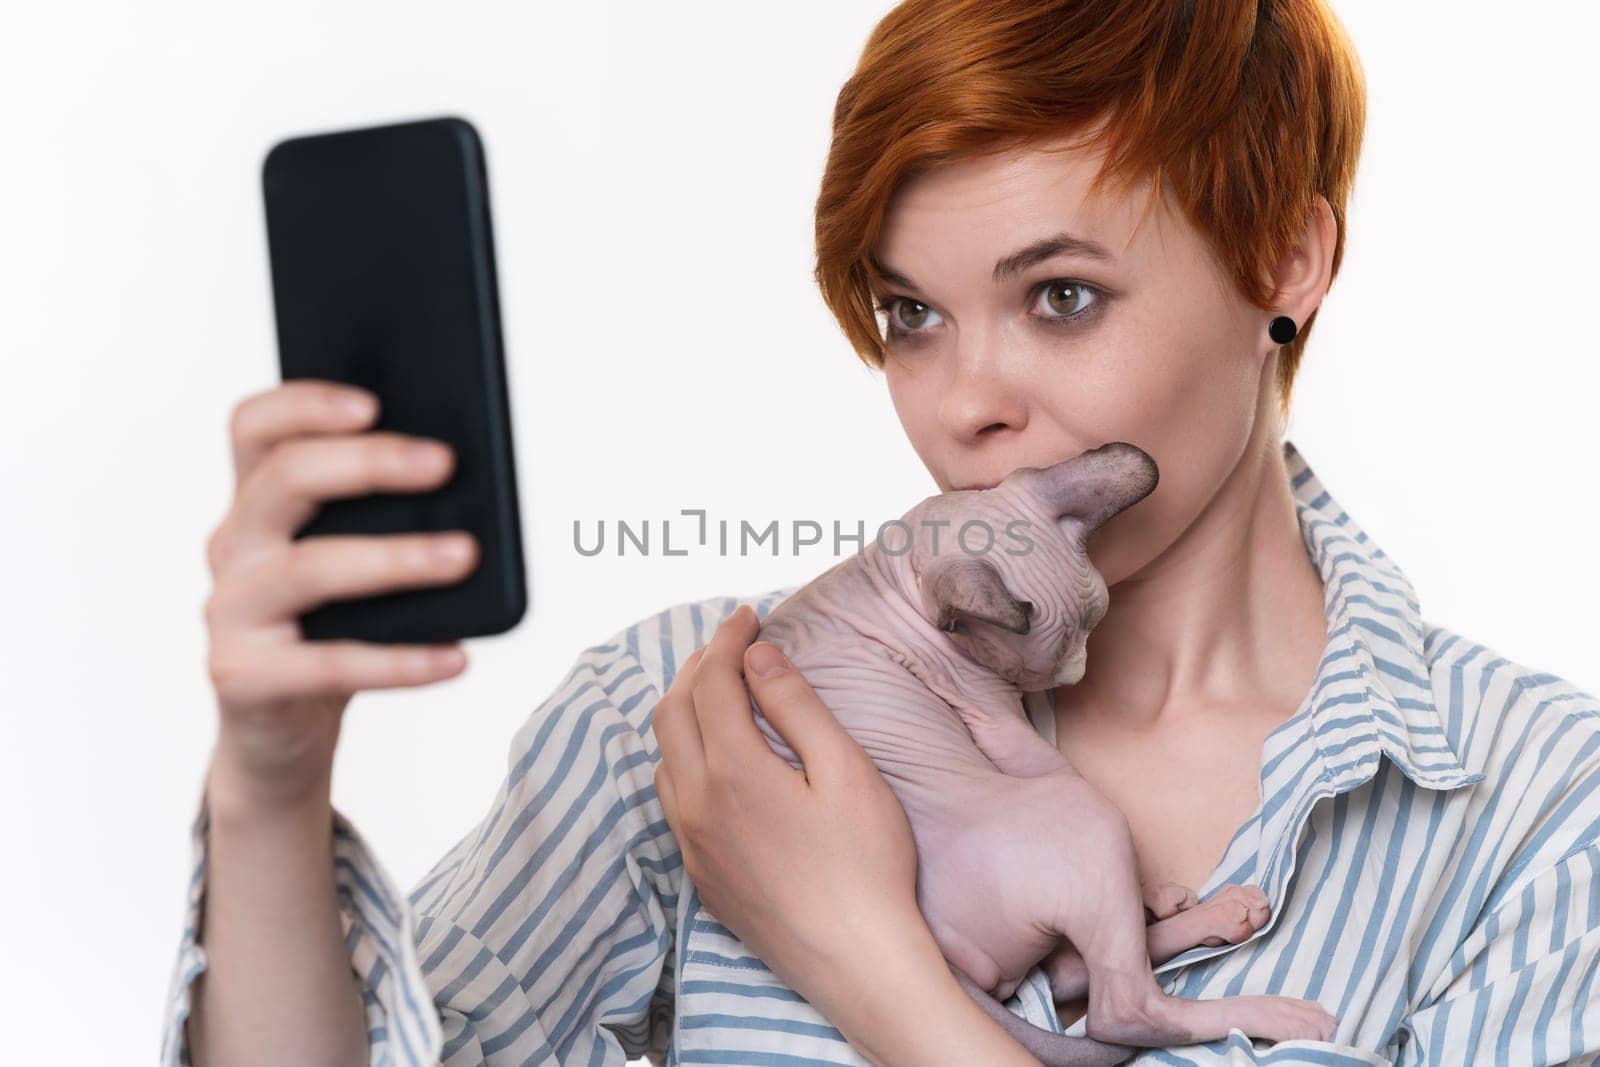 Woman holding and kissing kitten, taking selfie self portrait photos on smartphone. Young adult redhead hipster dressed striped white-blue shirt. Part of series. Studio shot on white background.